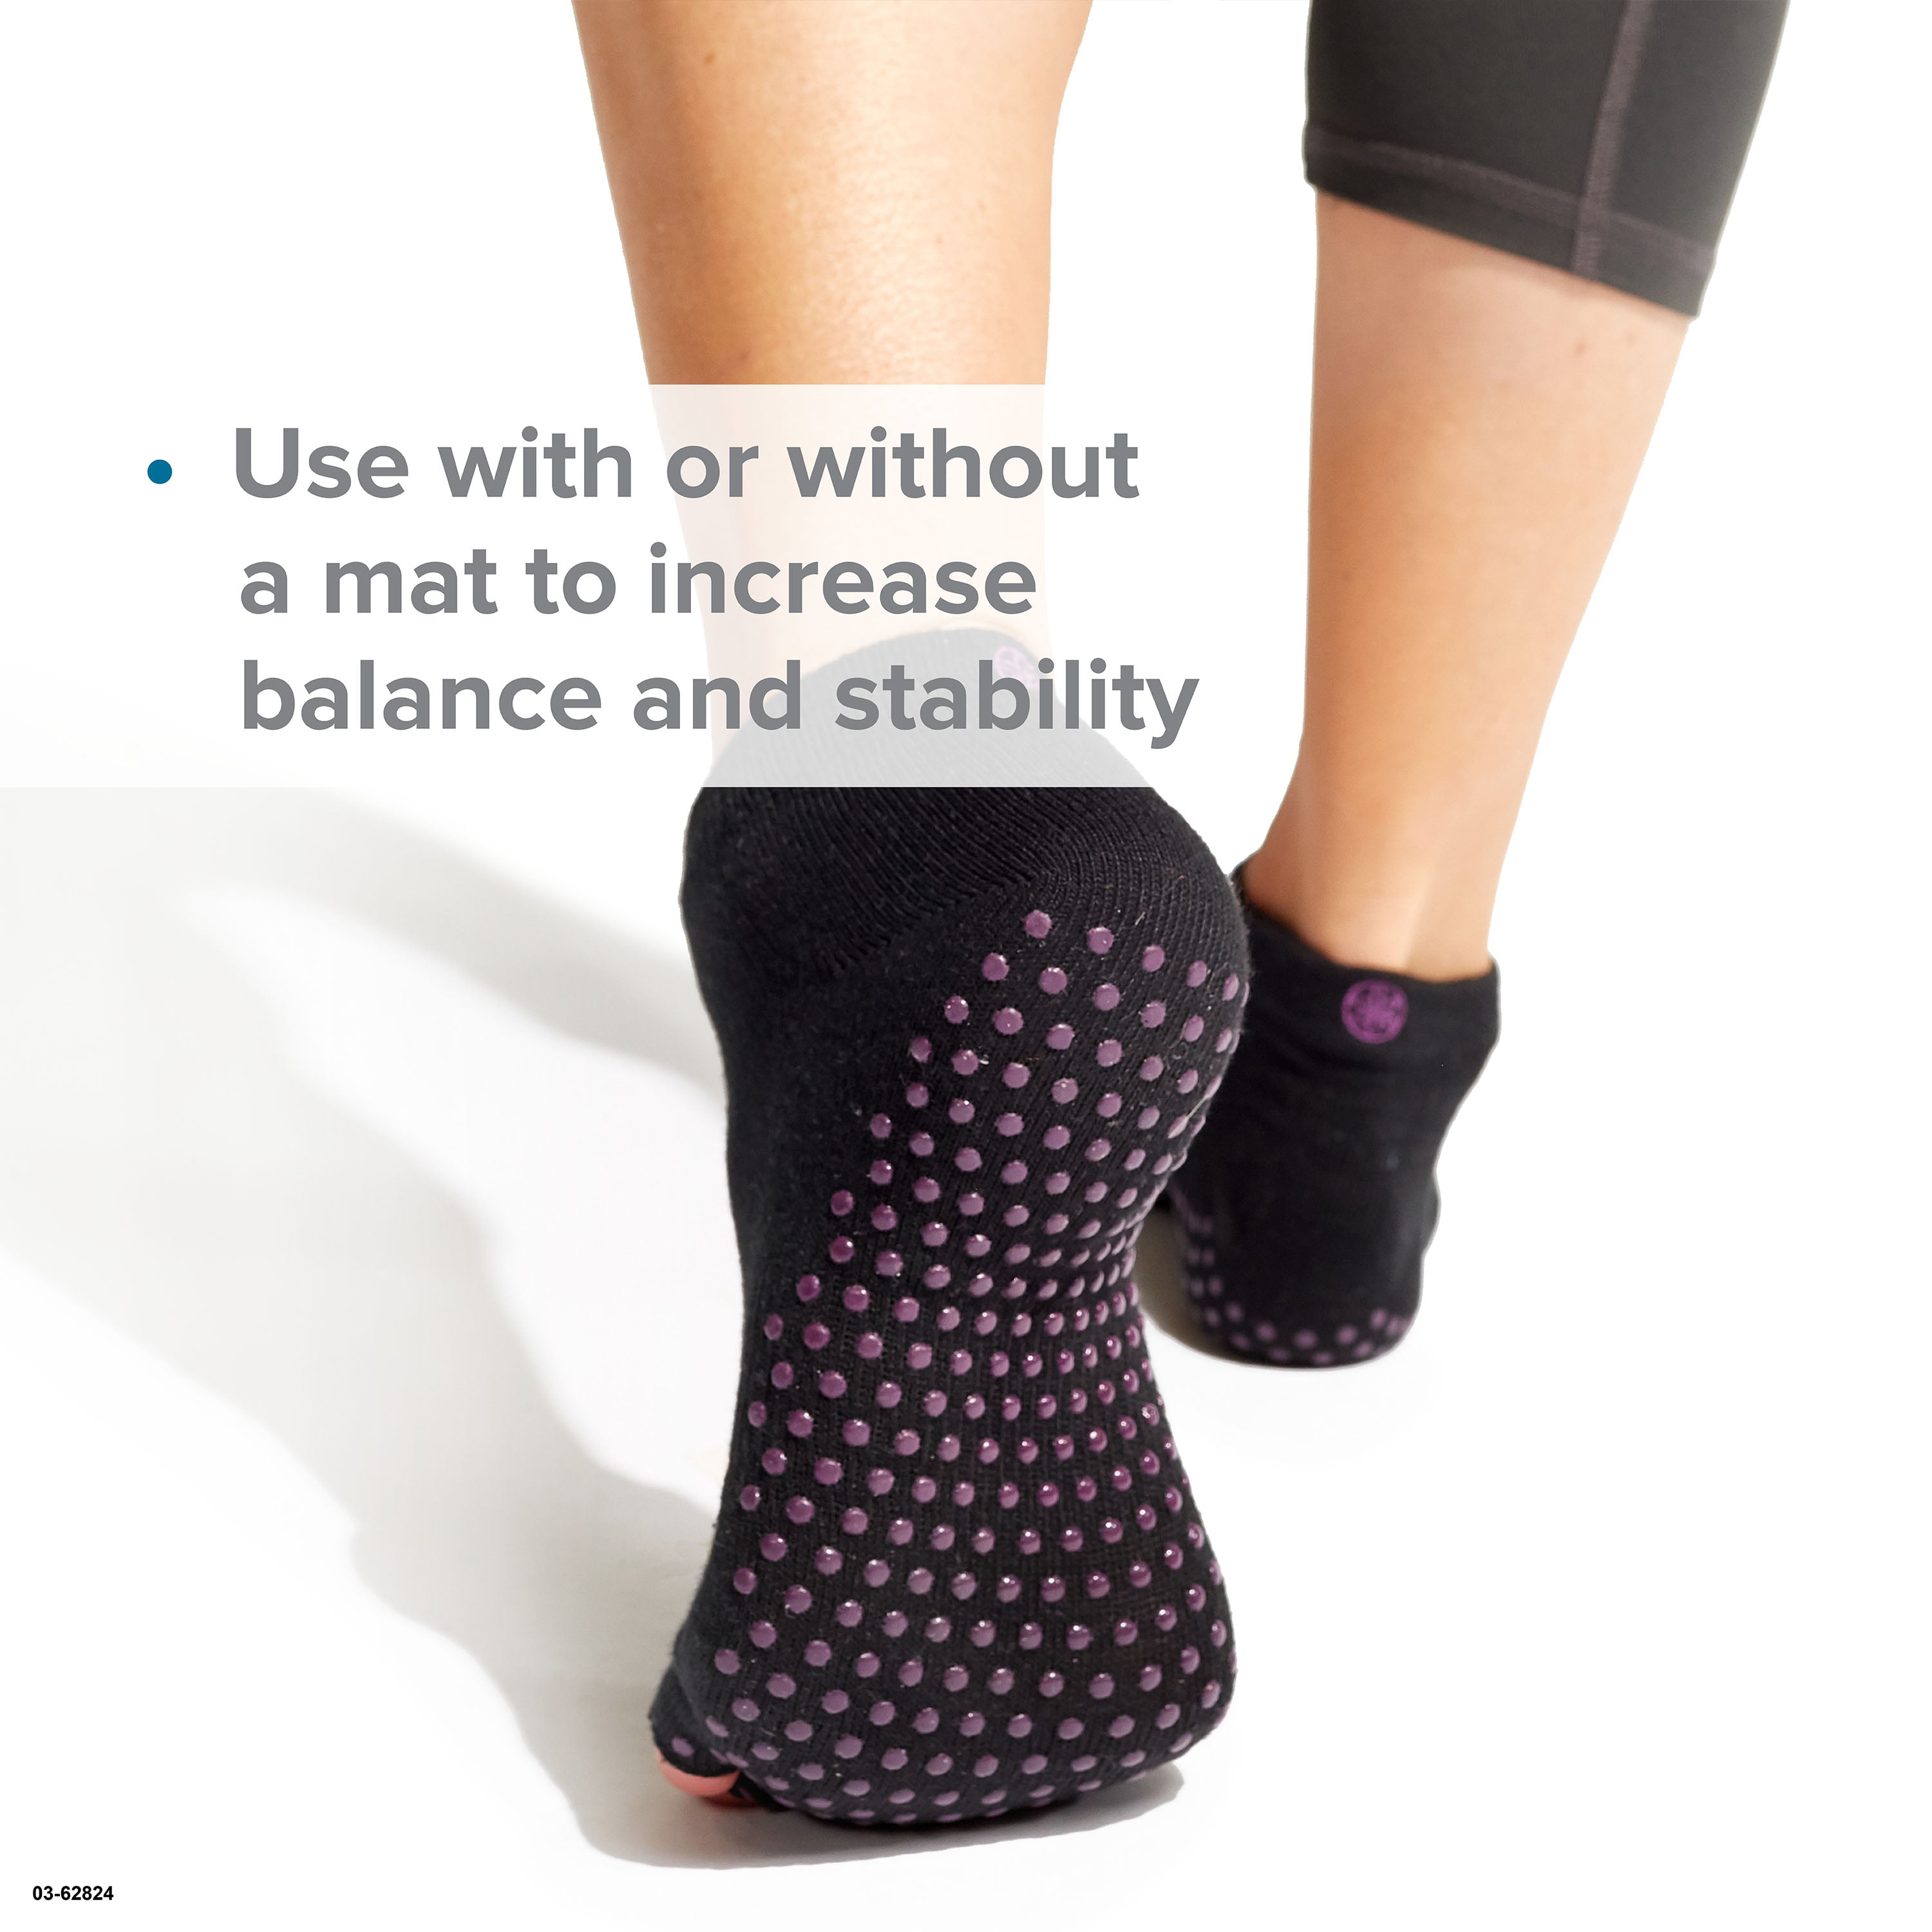 Evolve by Gaiam Toeless Grippy Yoga Socks, 2 Pack, Black and Grey